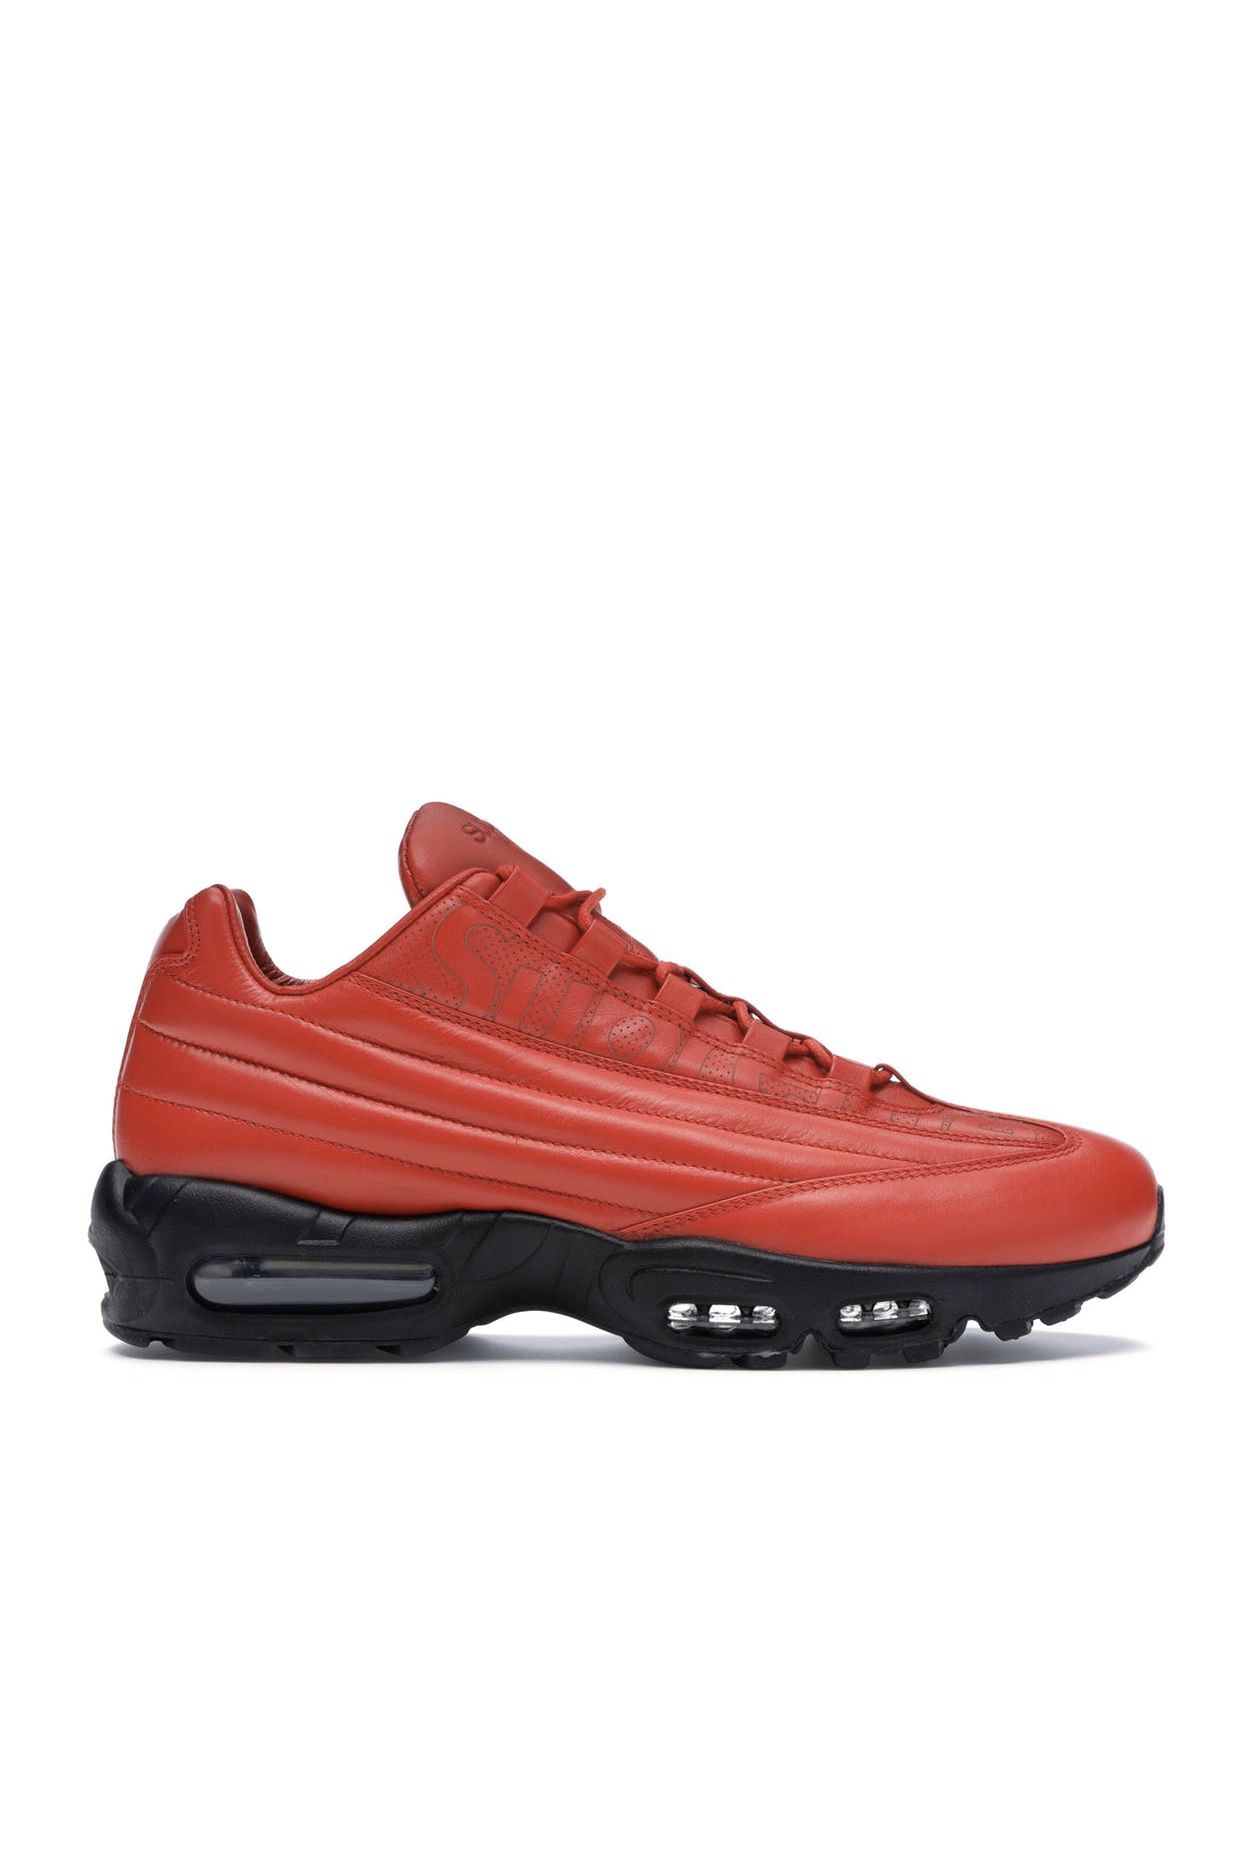 Supreme Nike air max 95 lux red Italy size 9